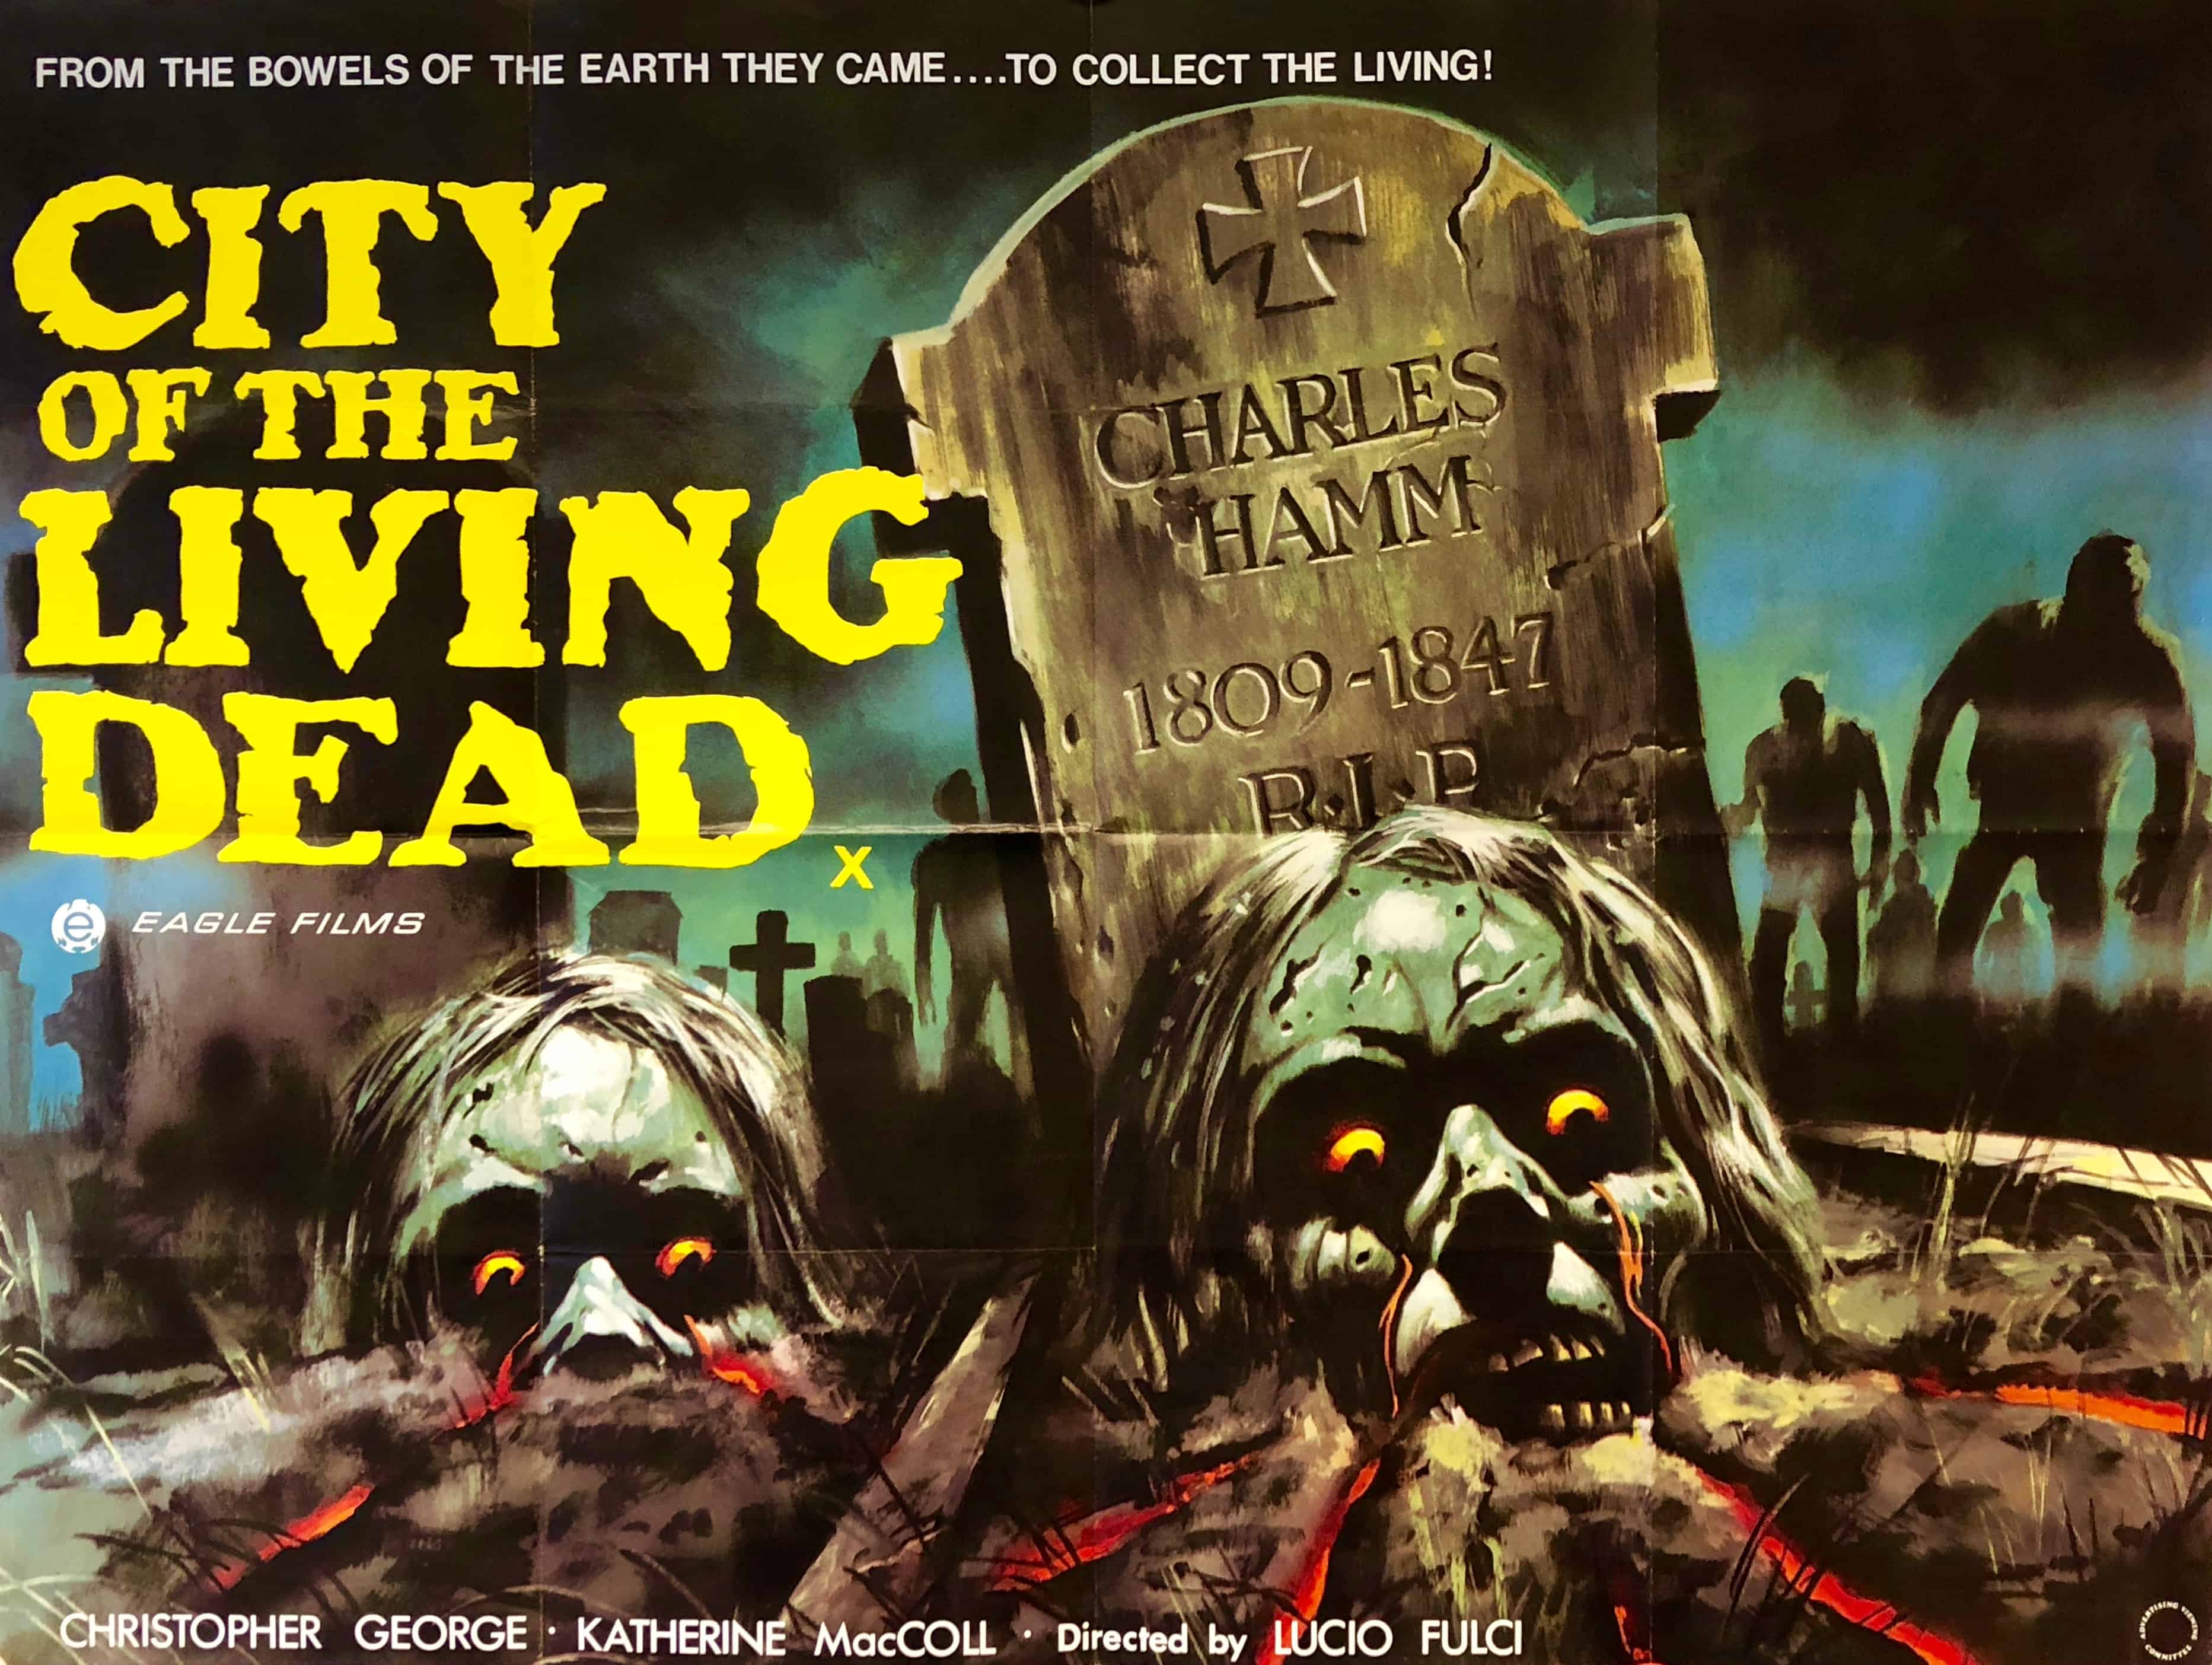 Mike’s Review: City of the Living Dead (1980)